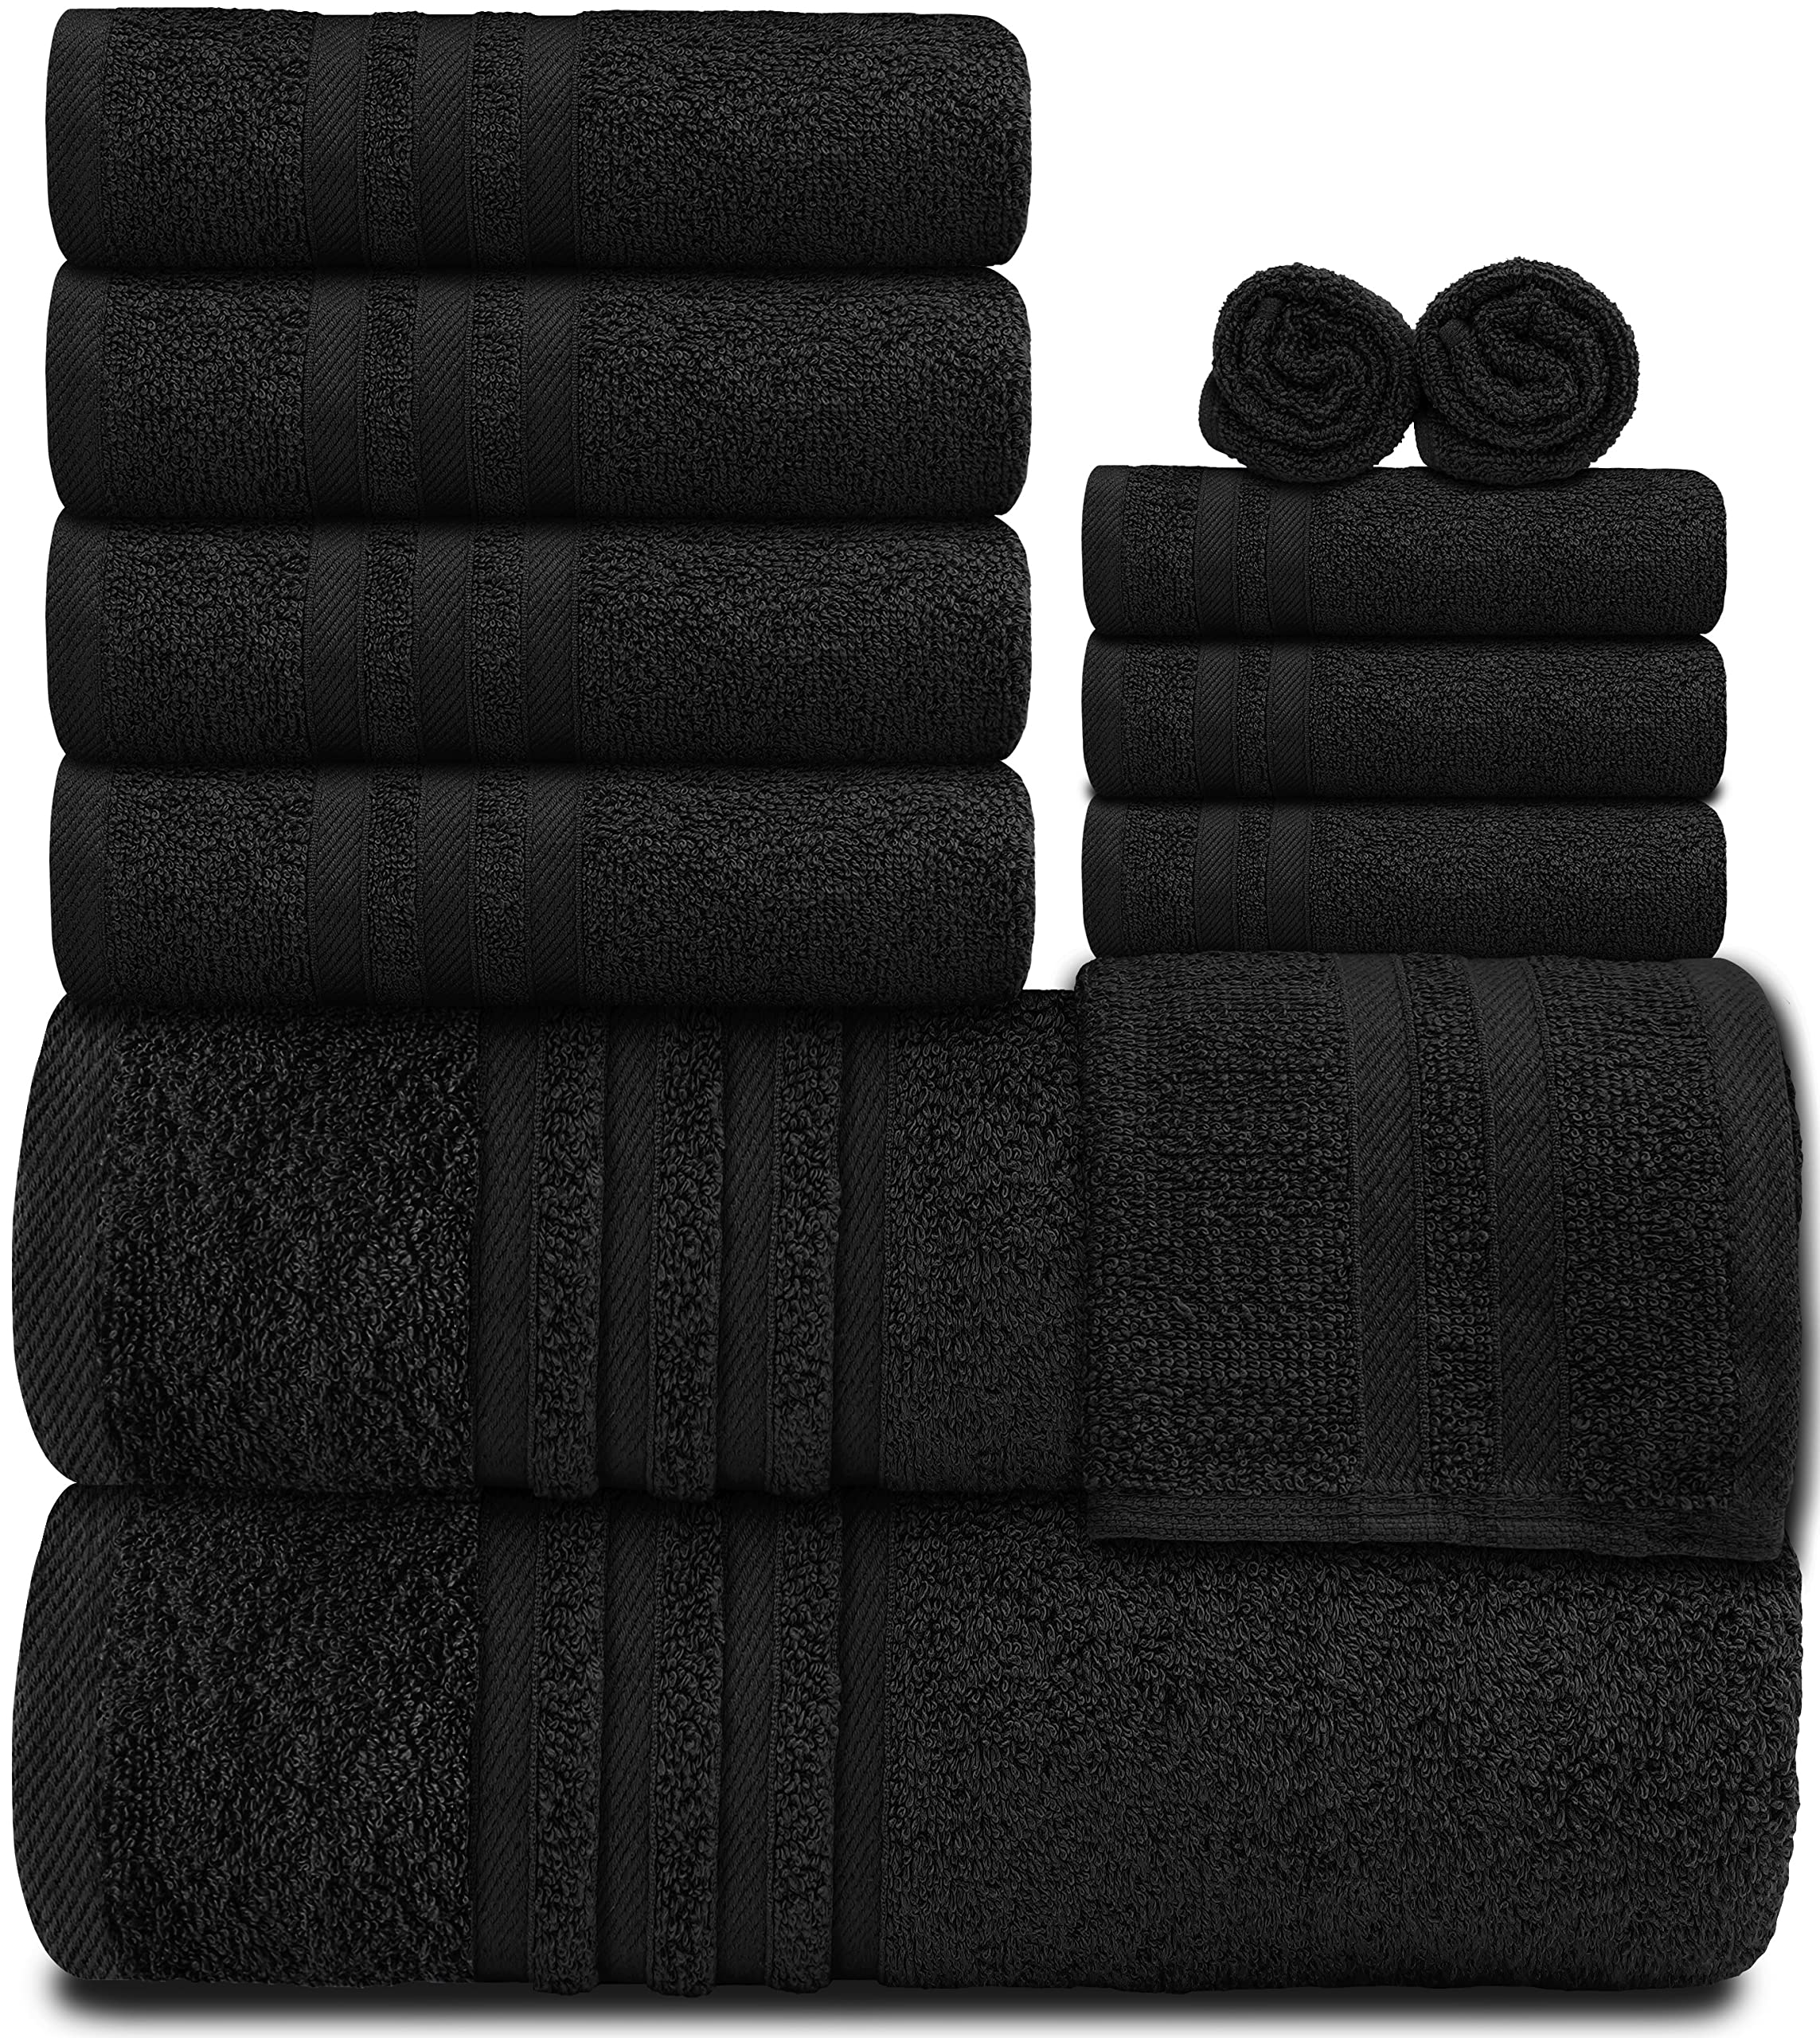 White Classic 12 Piece Bath Towel Set for Bathroom - Wealuxe Collection 2 Bath Towels, 4 Hand Towels, 6 Washcloths 100% Cotton Soft and Plush Highly Absorbent, Soft Towel for Hotel & Spa  - Like New